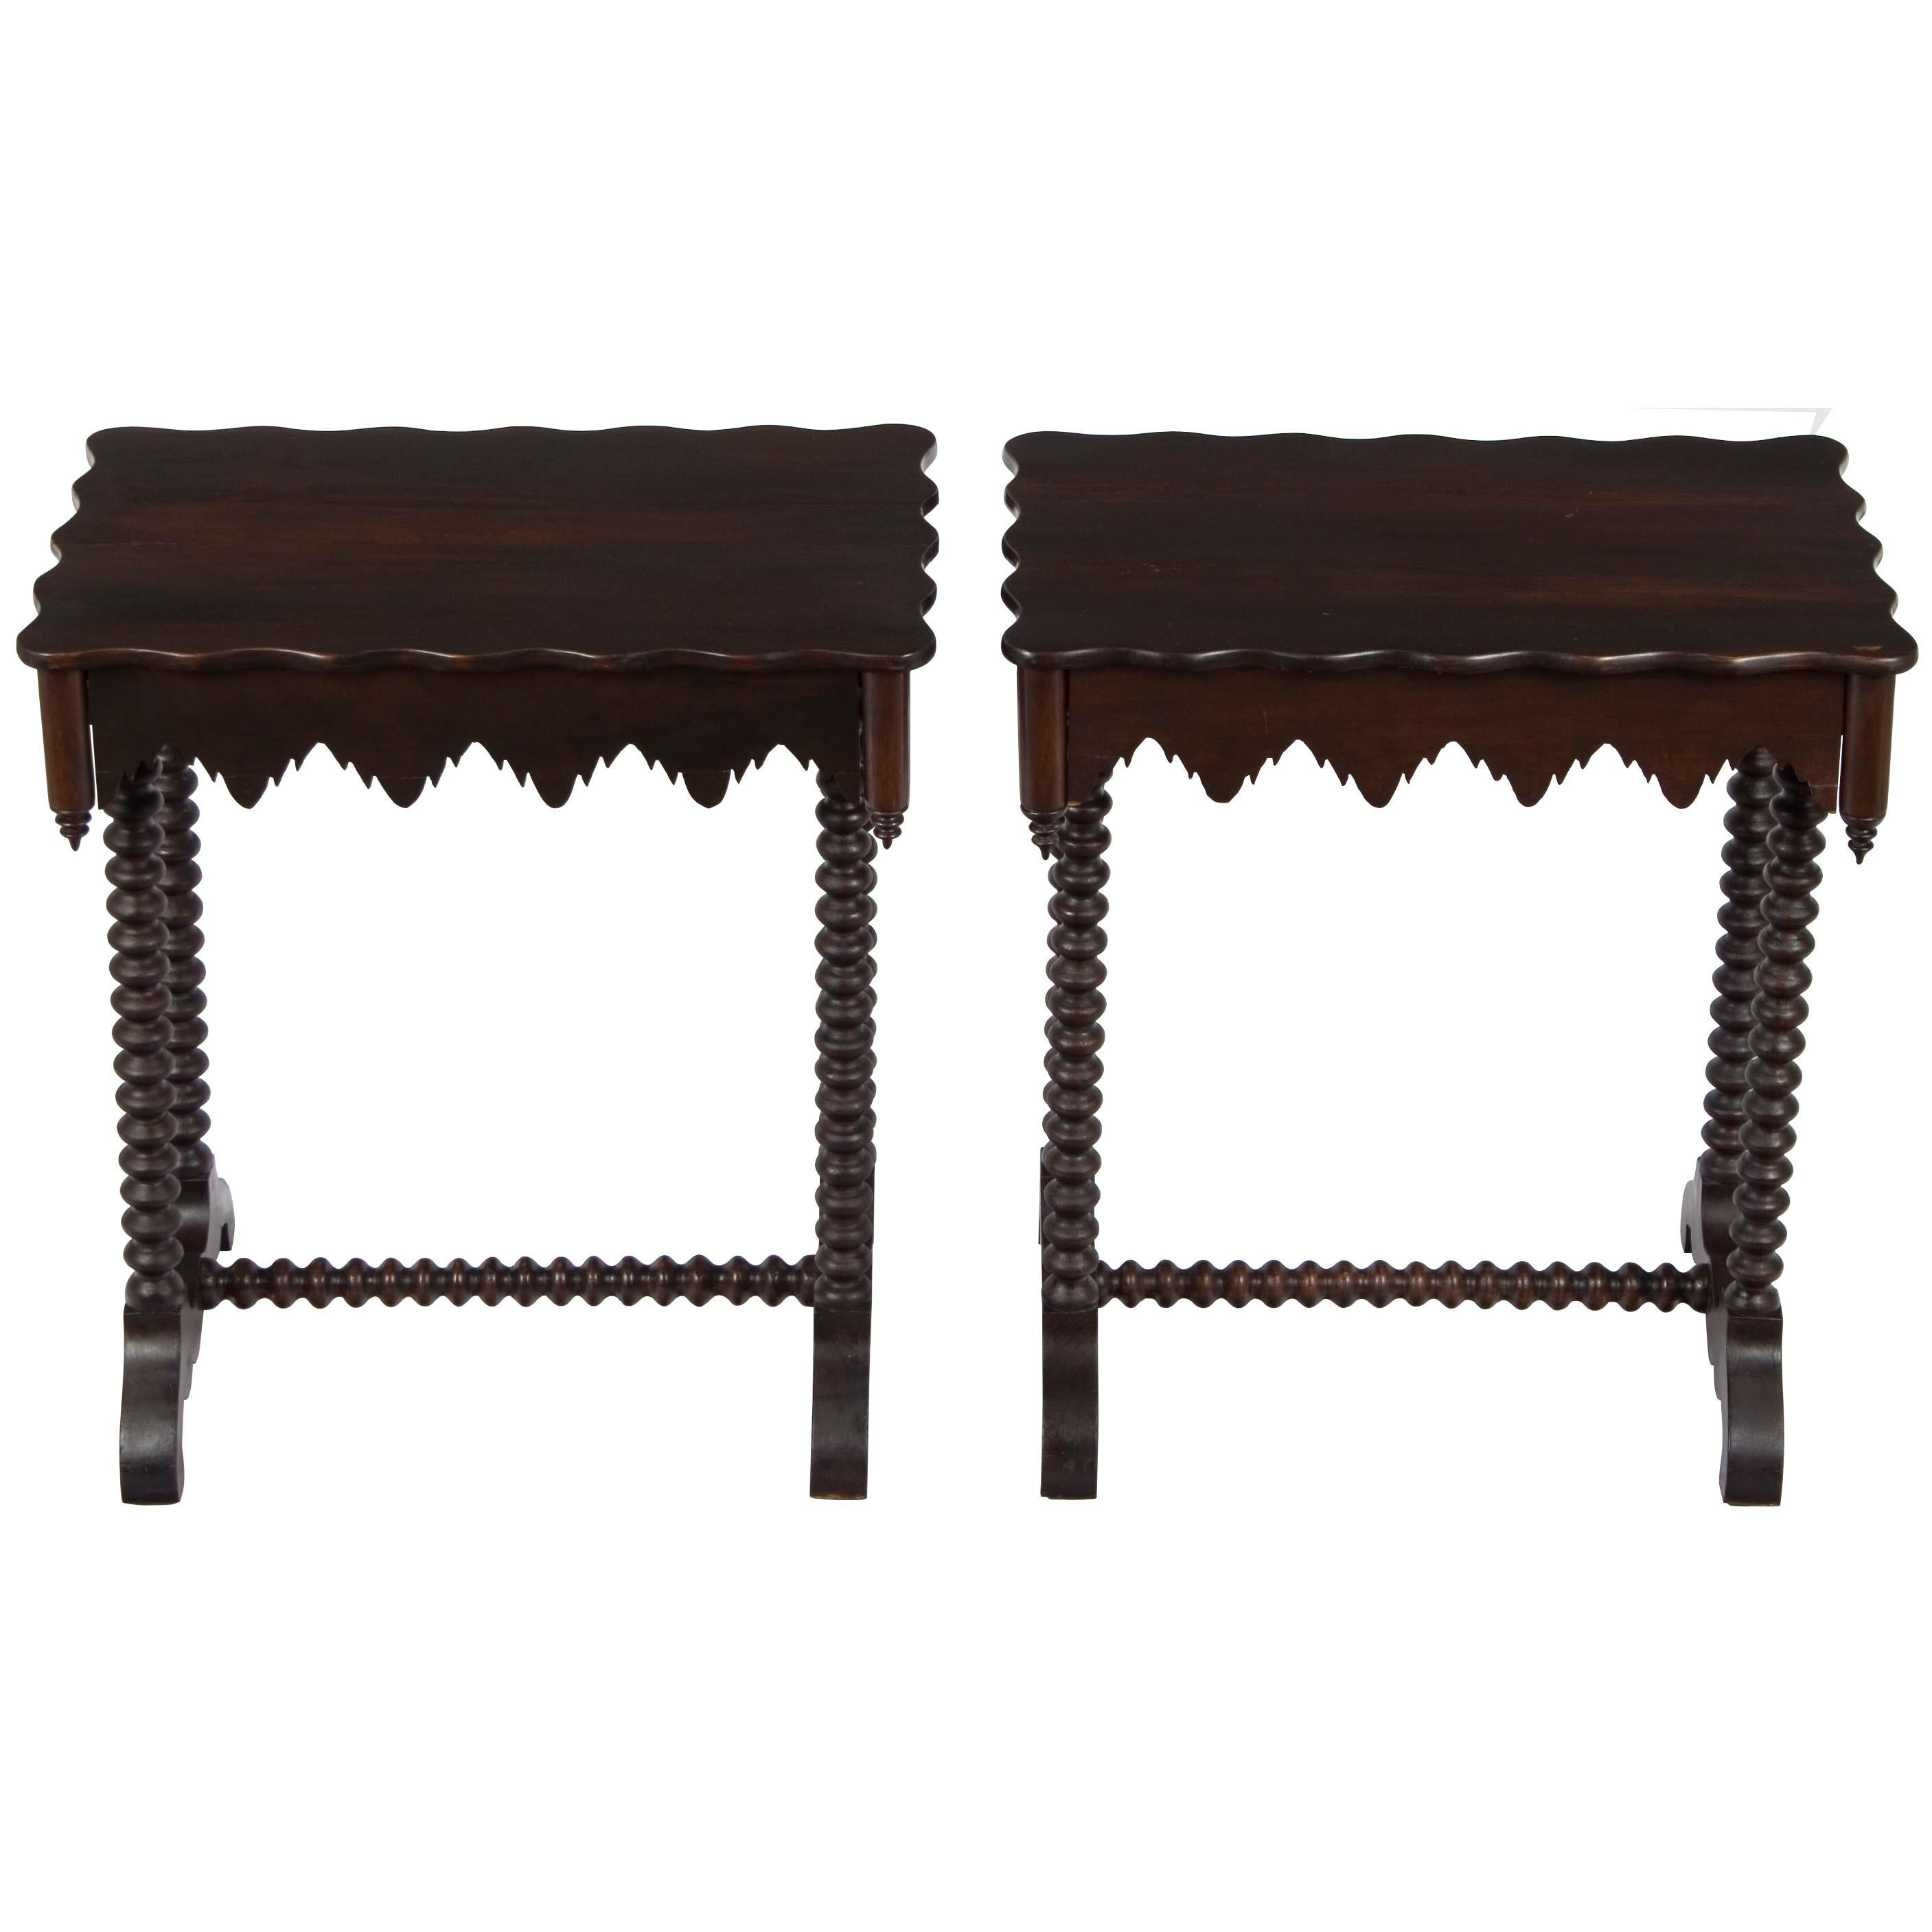 Pair of Dark Wood Twist Leg Matching Gothic Style End Tables with Drawers